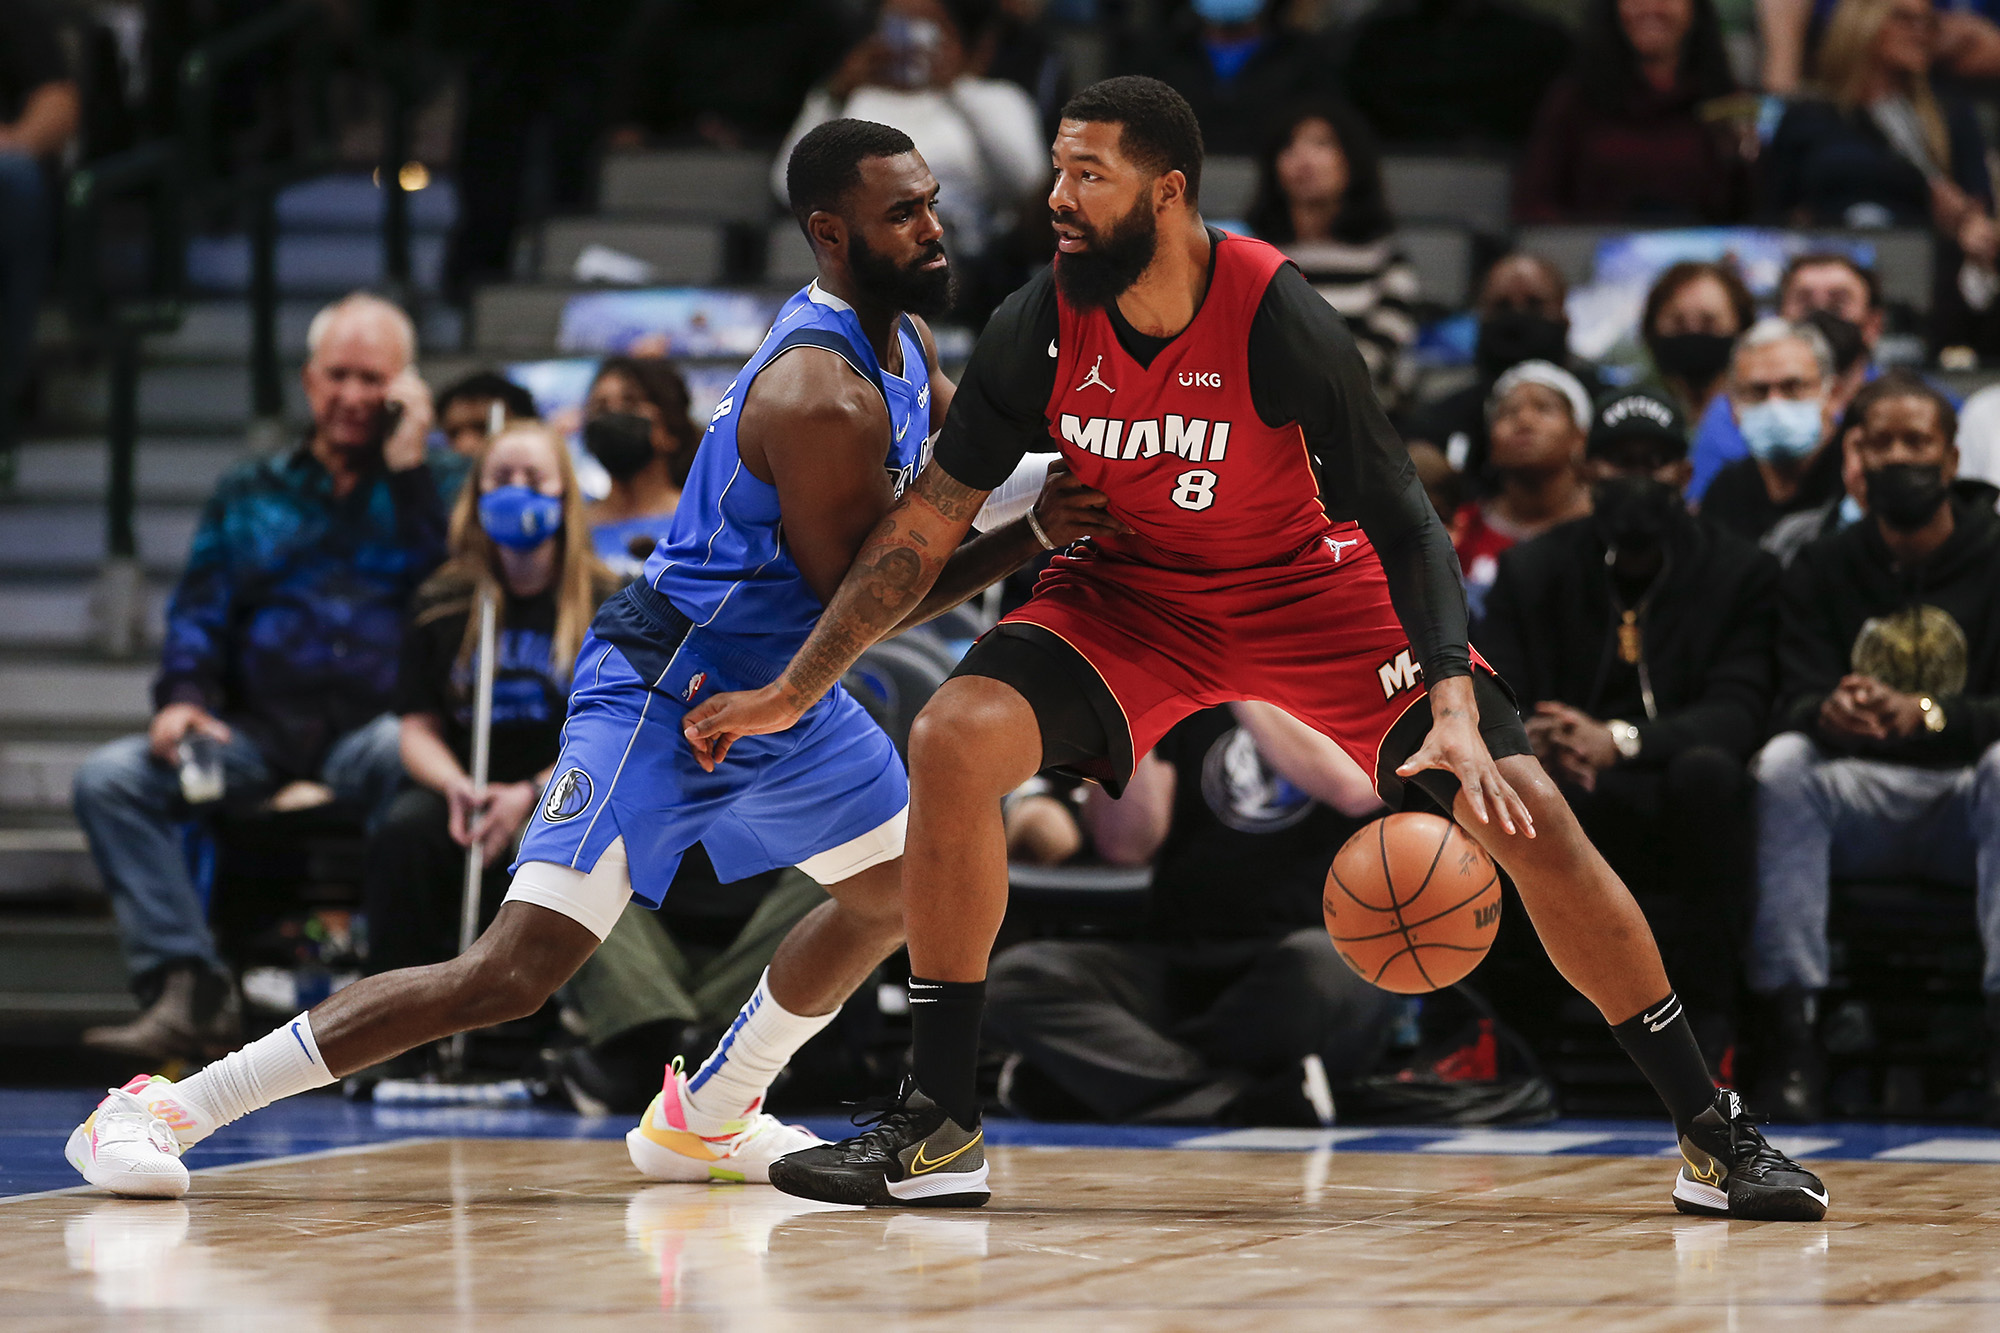 The Nets are getting close to a deal with Markieff Morris, who played for the Heat last season.